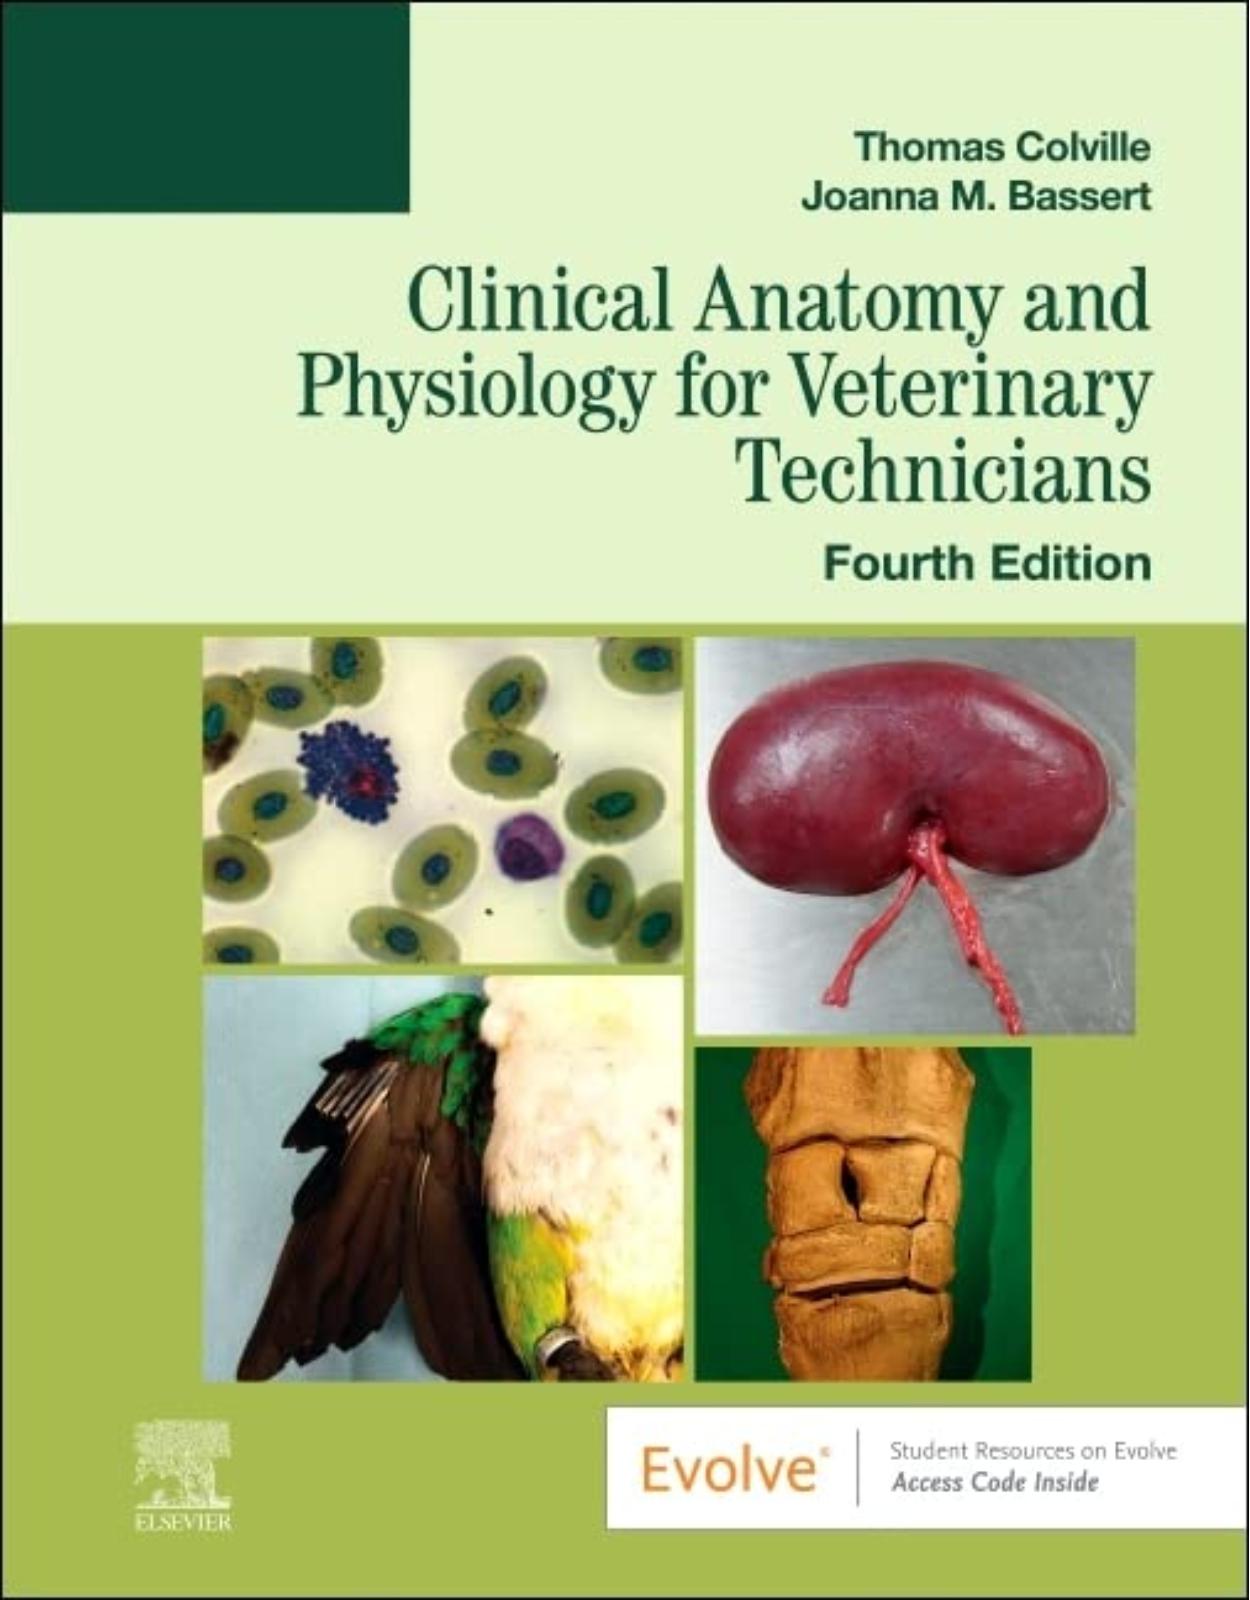 Clinical Anatomy and Physiology for Veterinary Technicians 4th